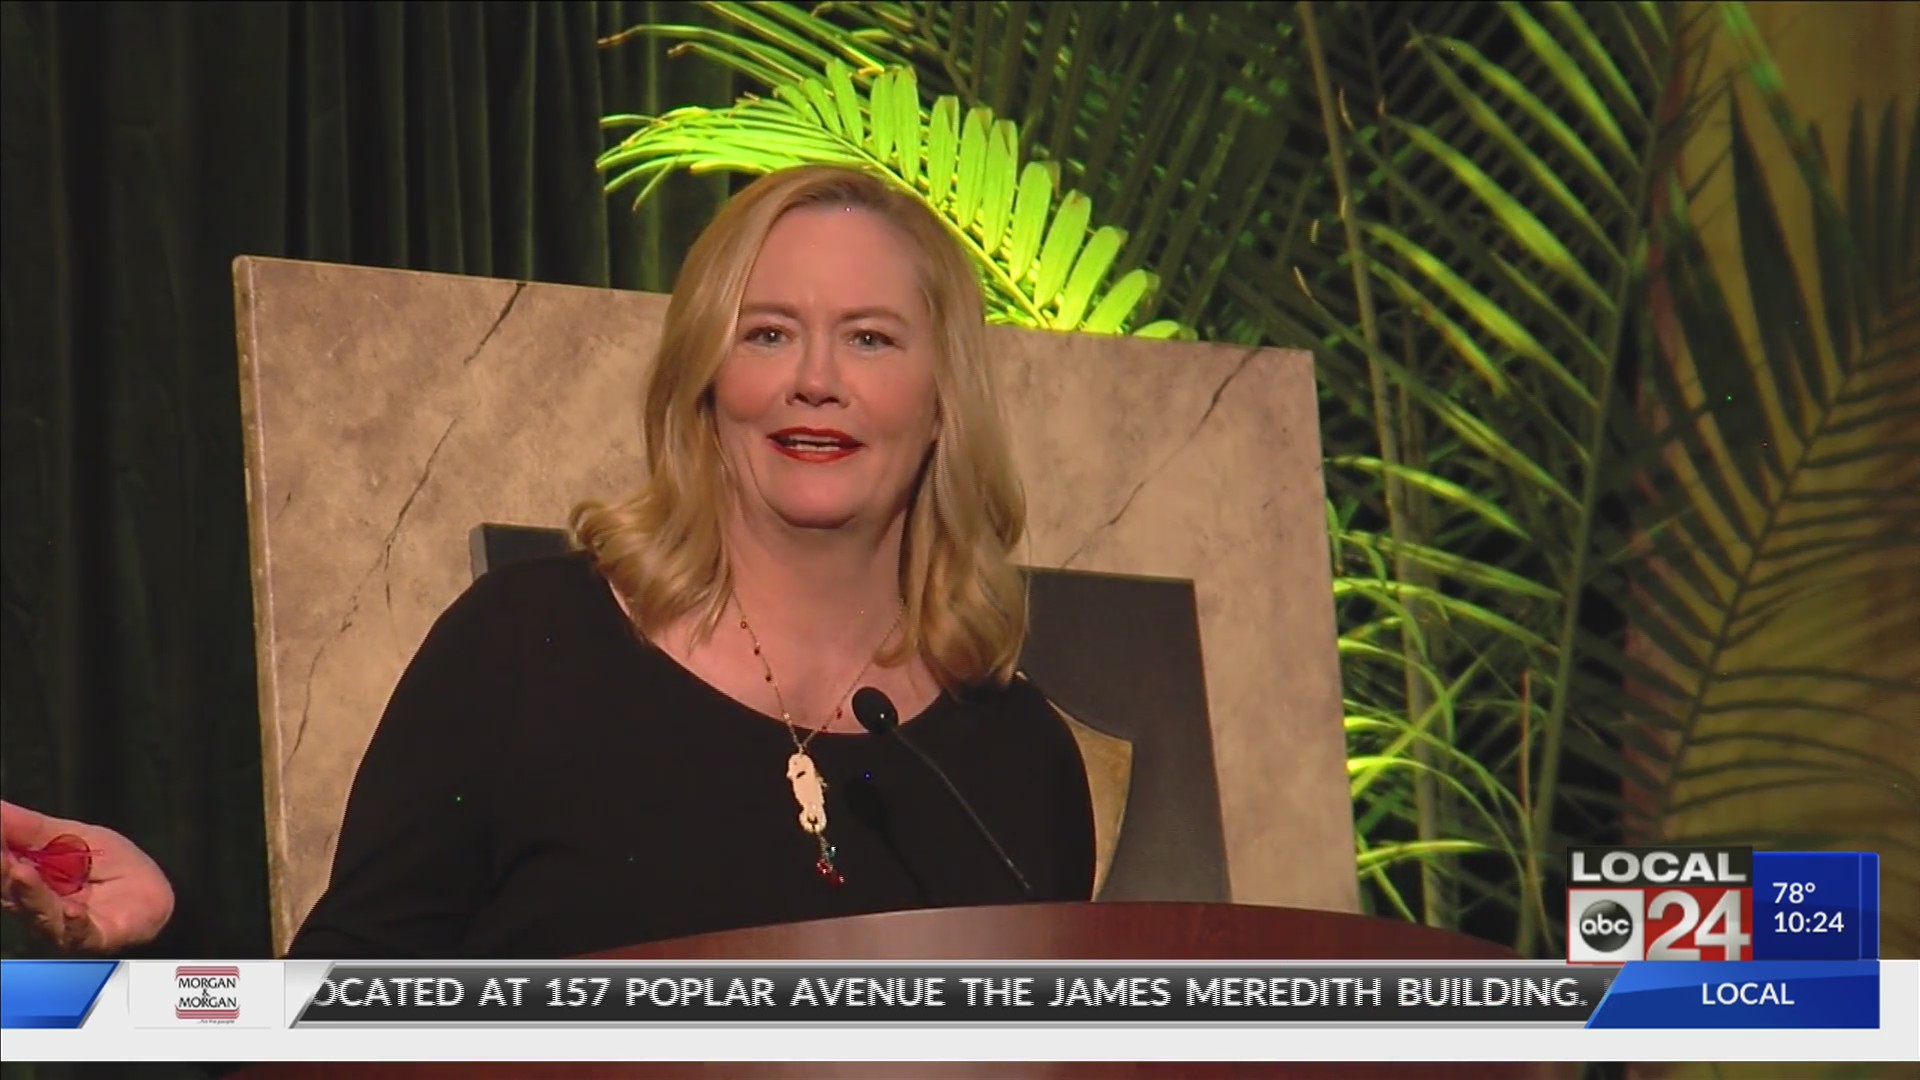 Cybill Shepherd inducted into The Peabody Memphis’ Duck Walk Hall of Fame